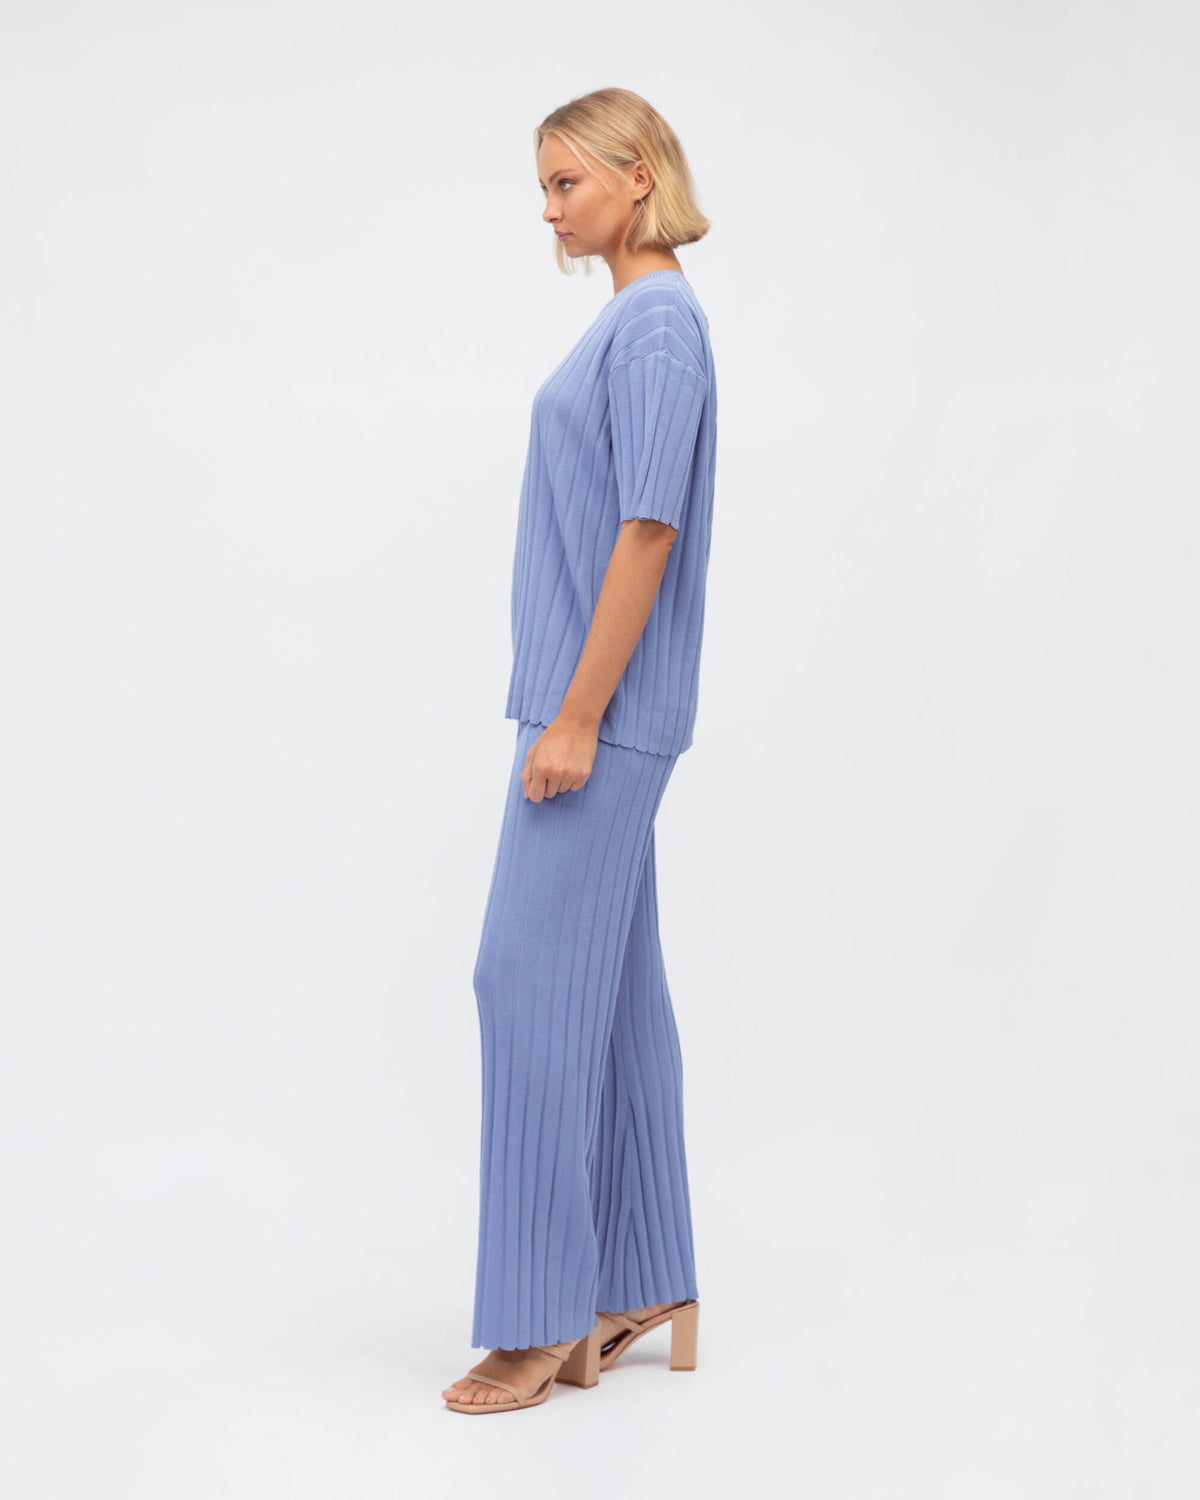 WIDE RIB CO-ORD SHORT SLEEVE TOP